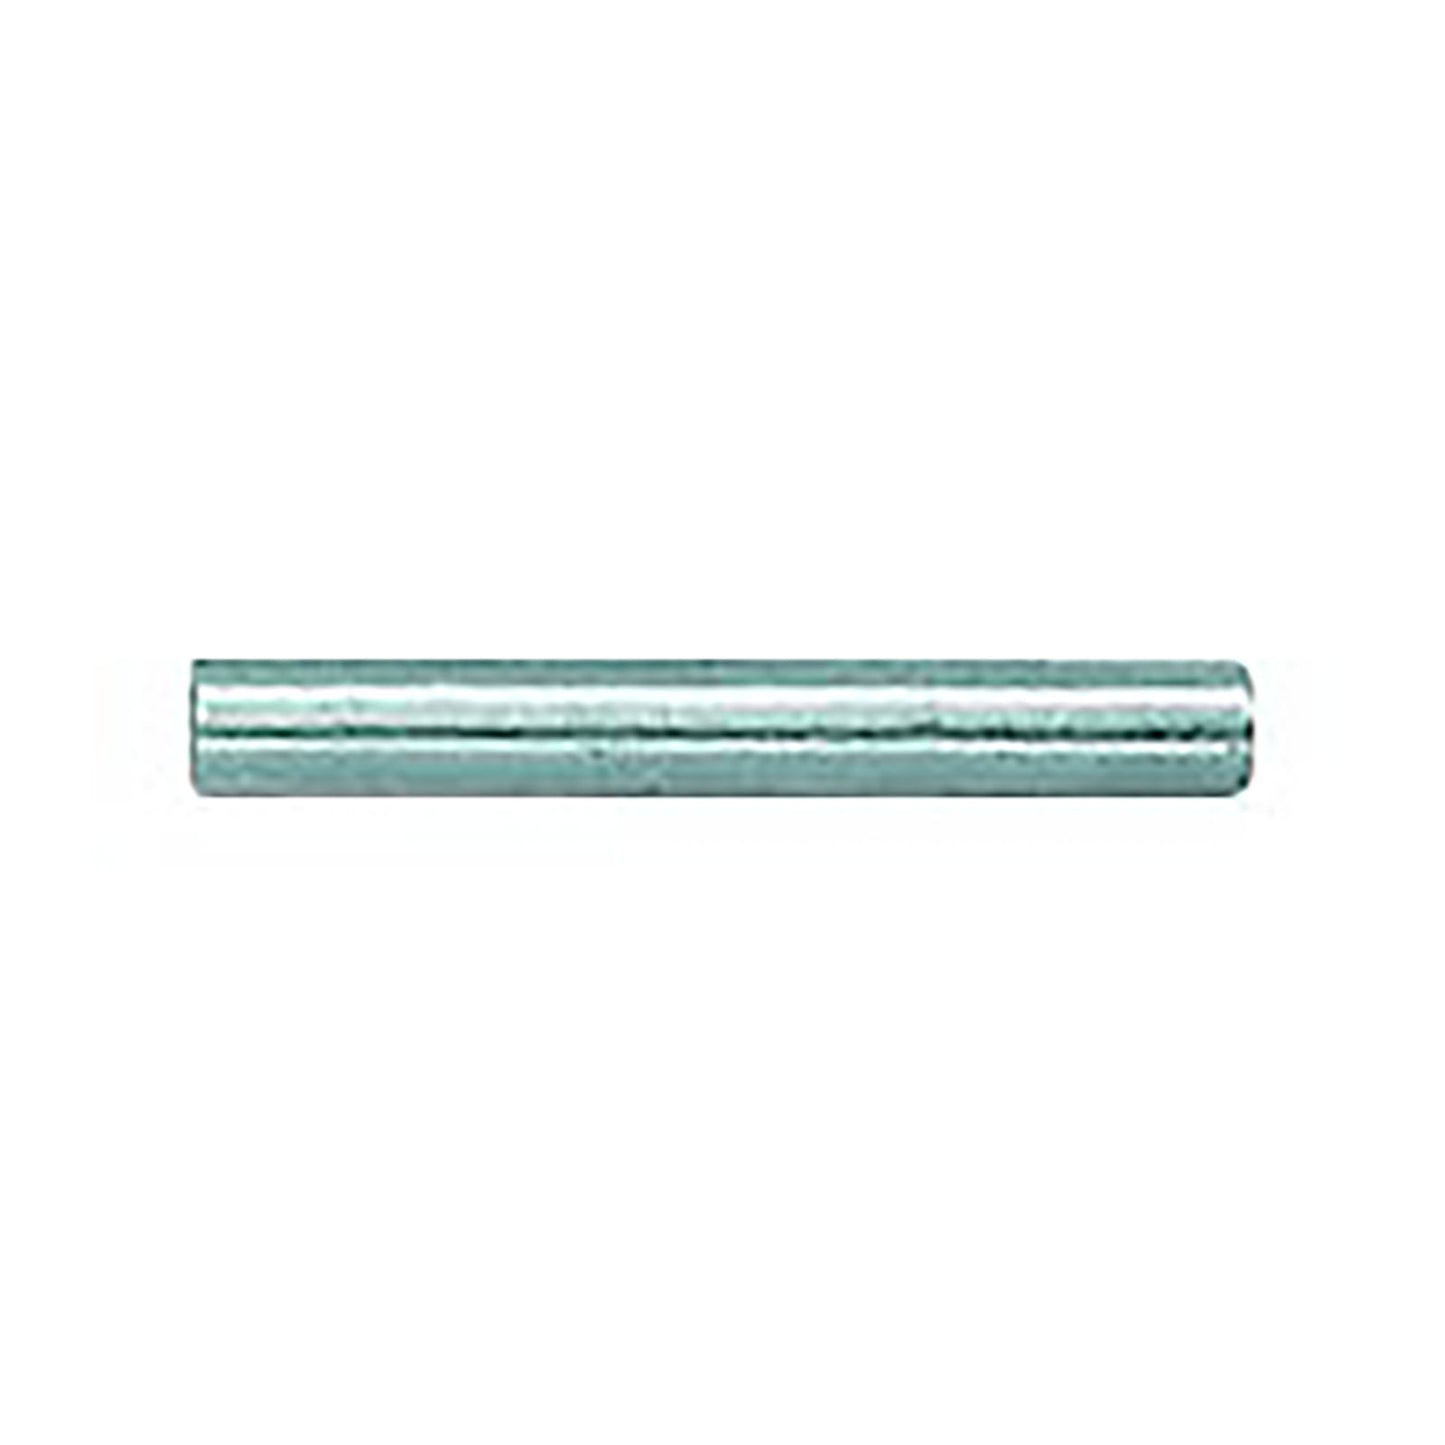 GEDORE KB 3775 - Safety Pin 1.1/2" (6676840)